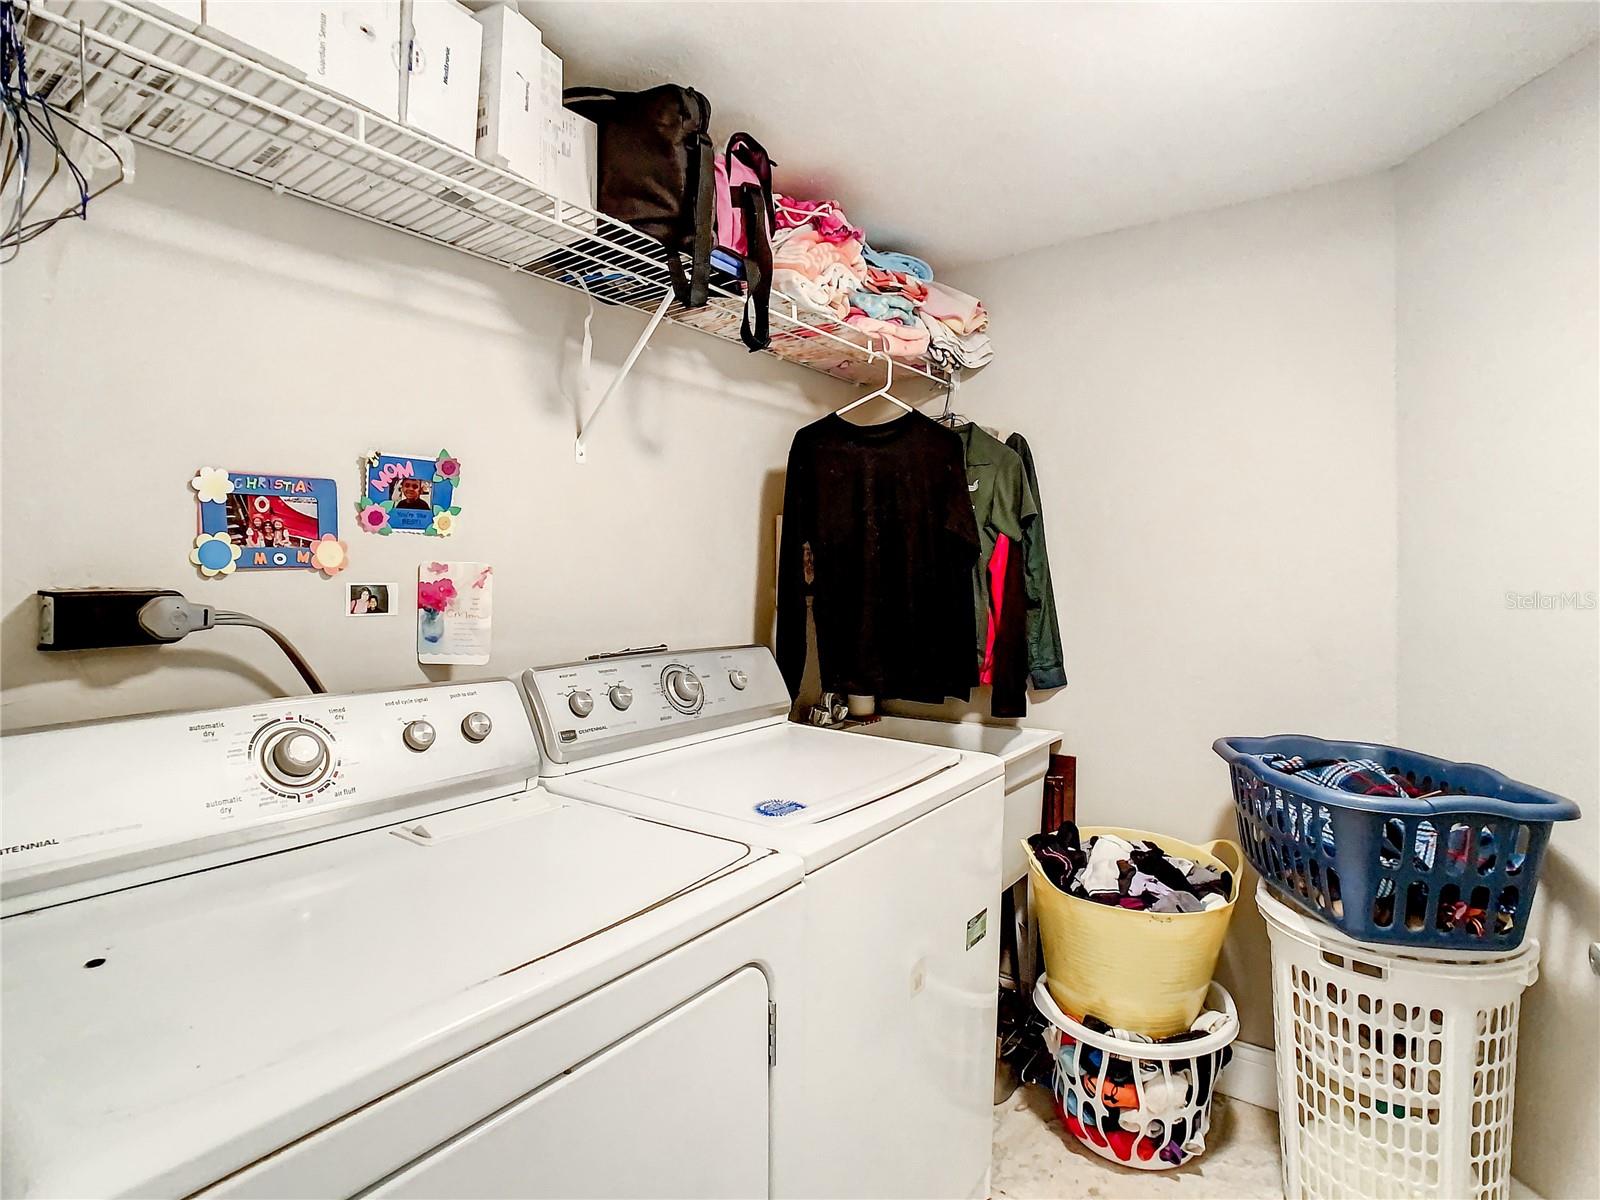 Laundry room/ First floor